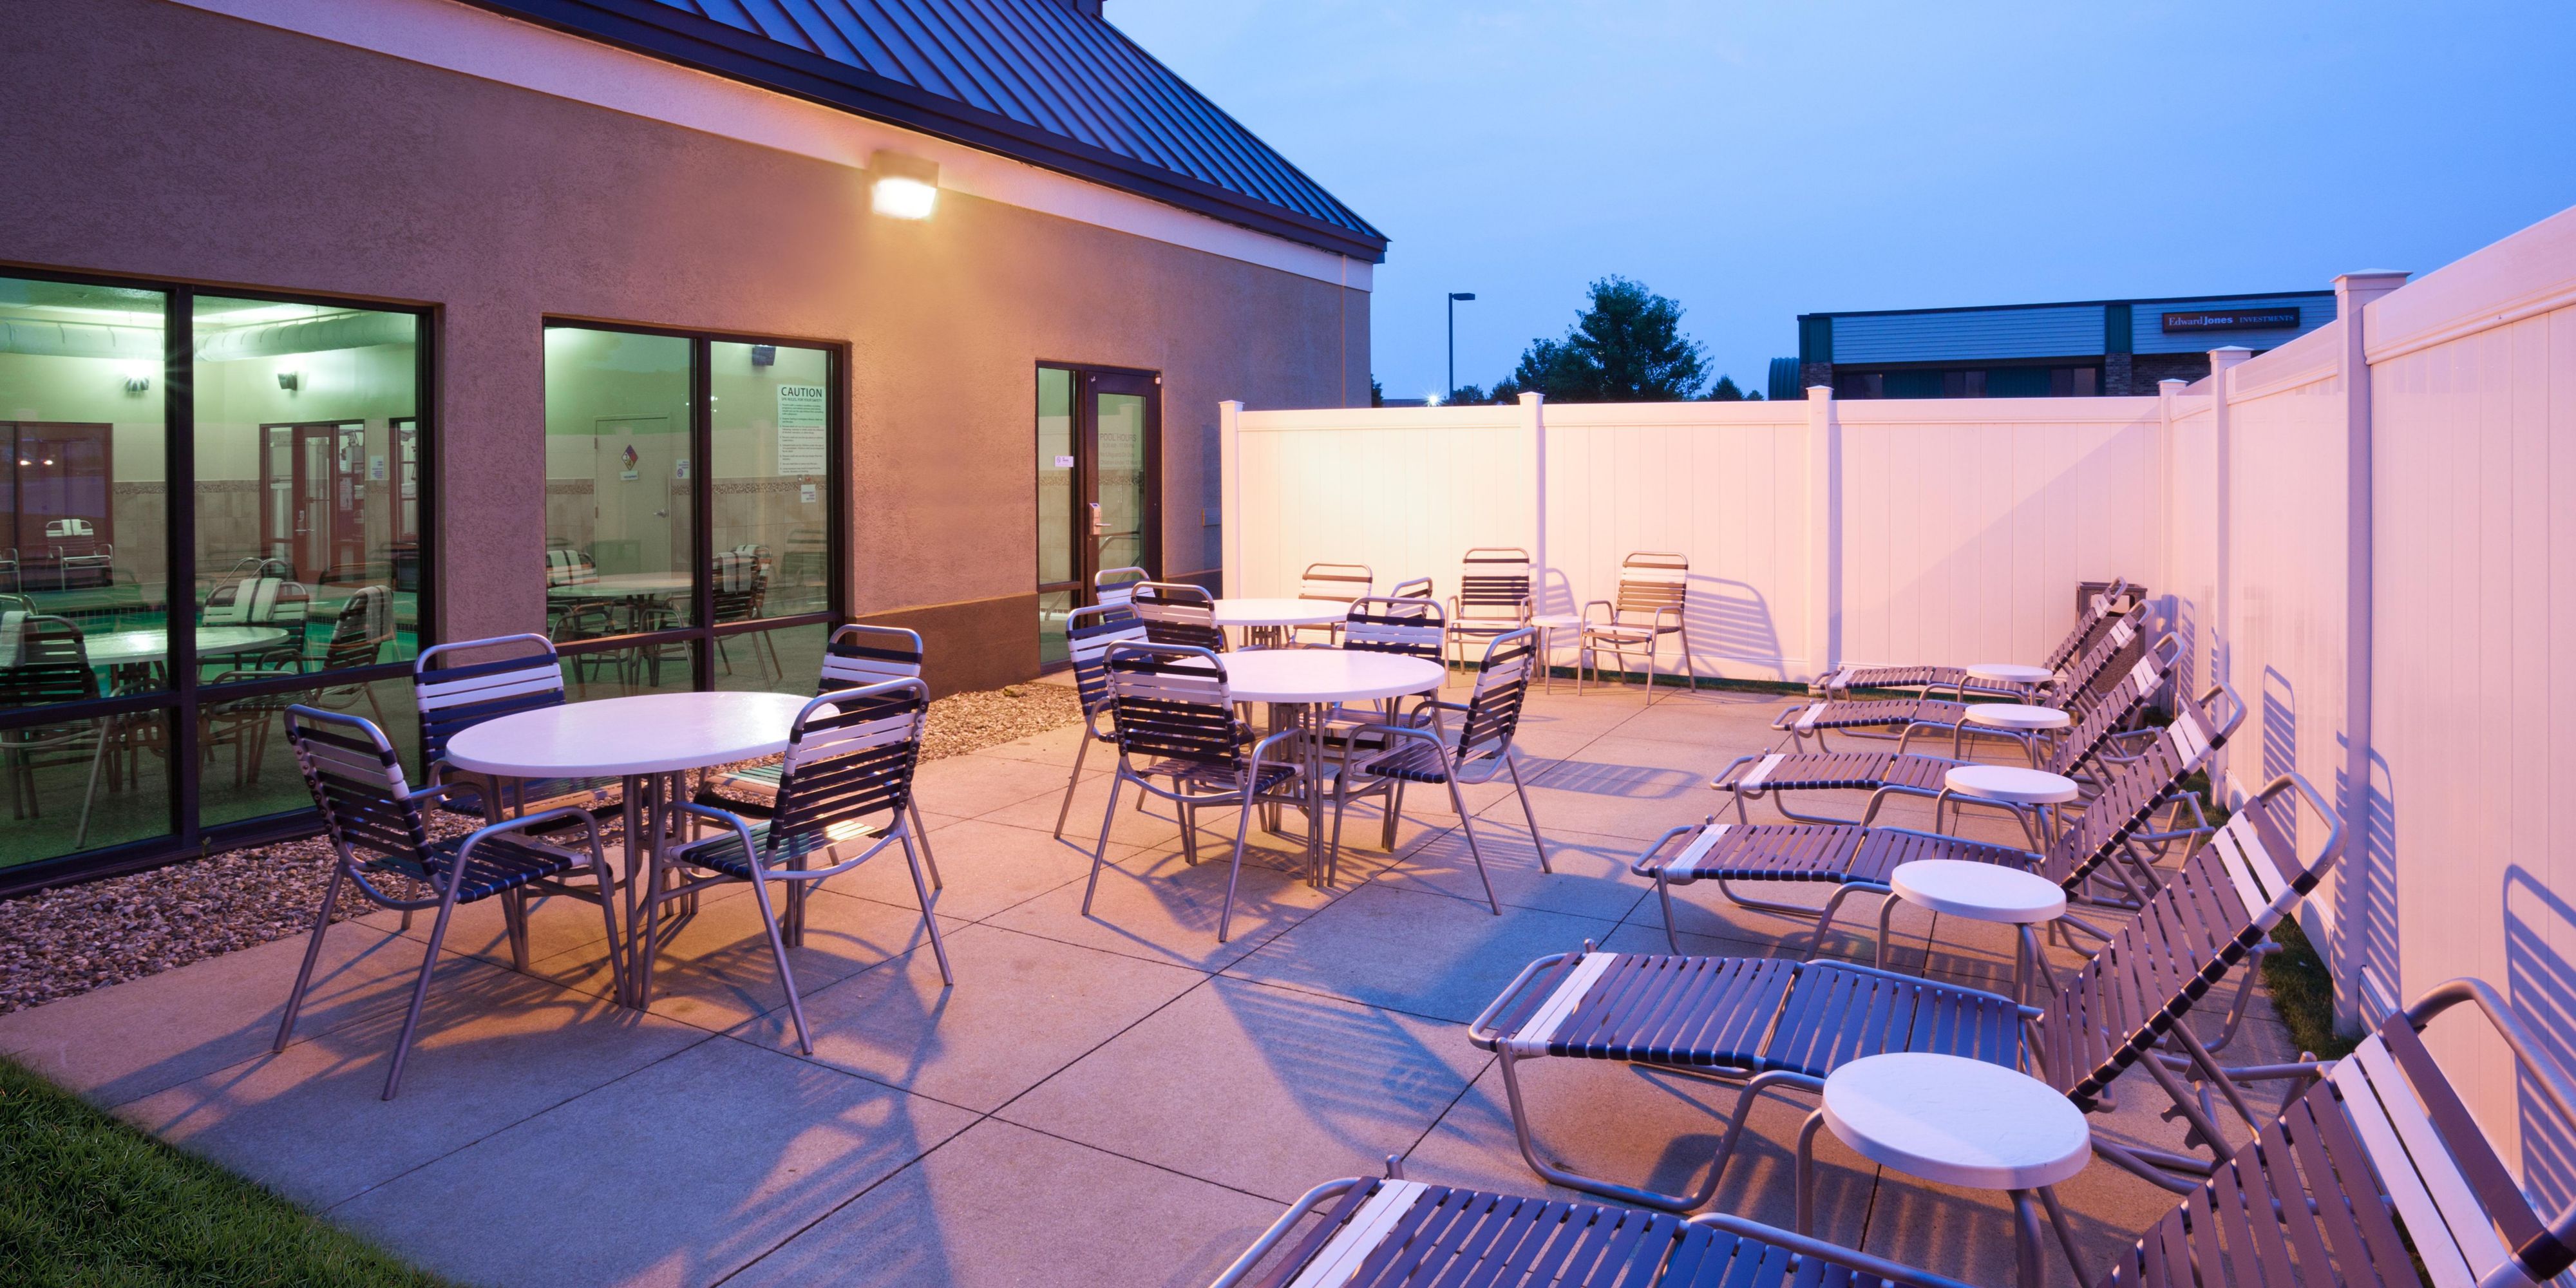 Get some sun or gaze up at the stars while relaxing in our patio area beside our indoor pool. Great space for you and the family to enjoy some quality time together this summer! So grab some cards, dominoes, favorite game, or a book to read and unwind! 